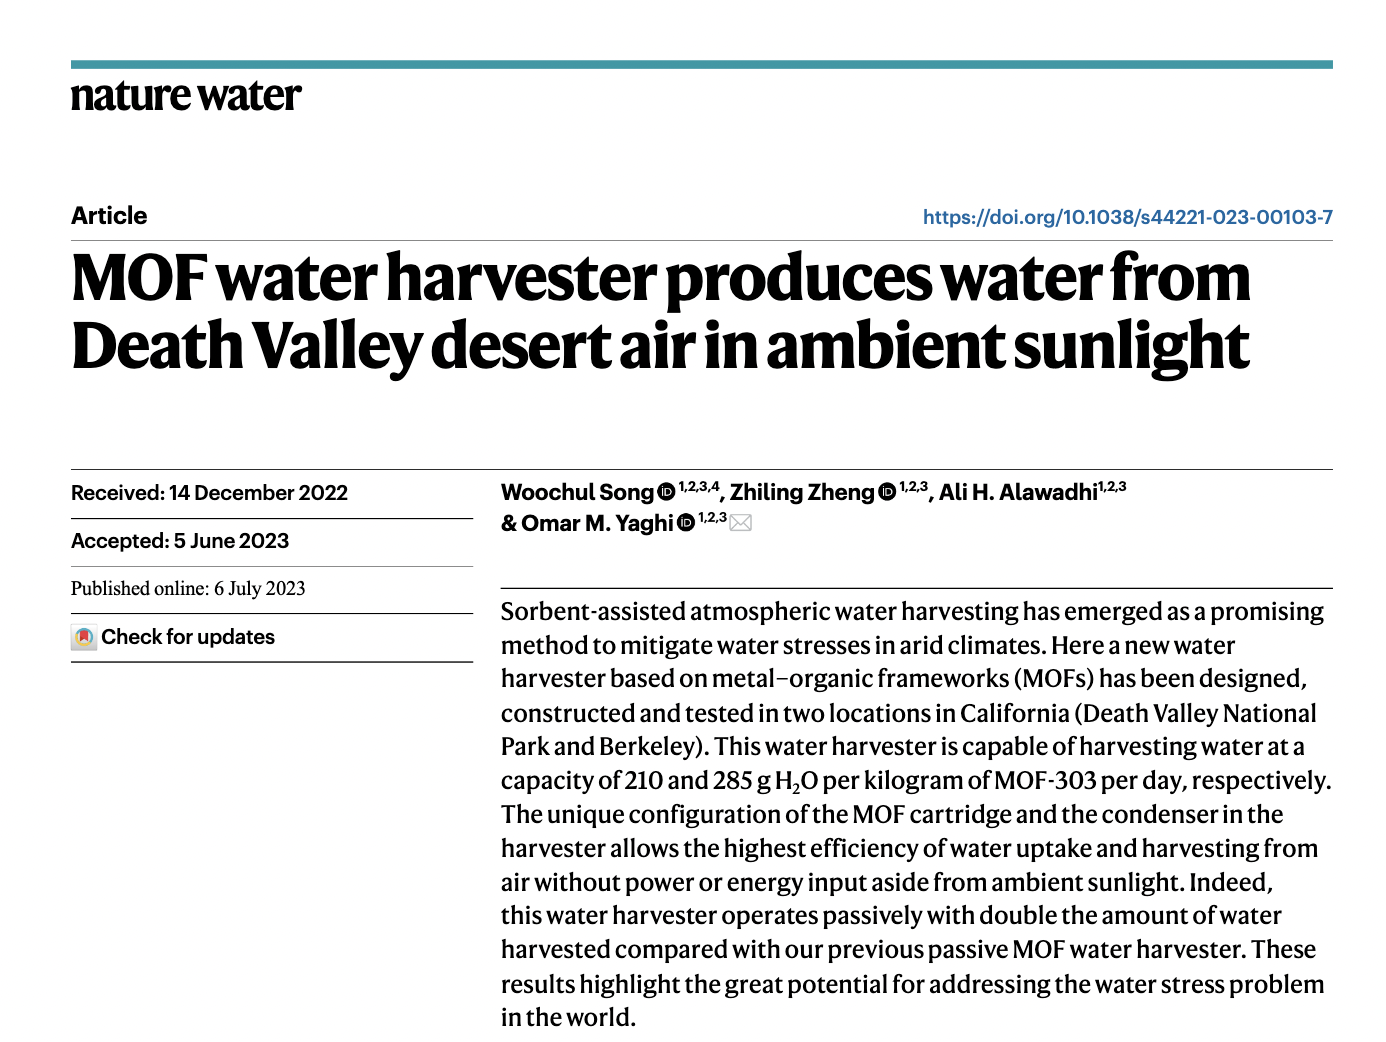 MOF water harvester produces water from Death Valley desert air in ambient sunlightSOURCE:https://www.nature.com/articles/s44221-023-00103-7.epd...